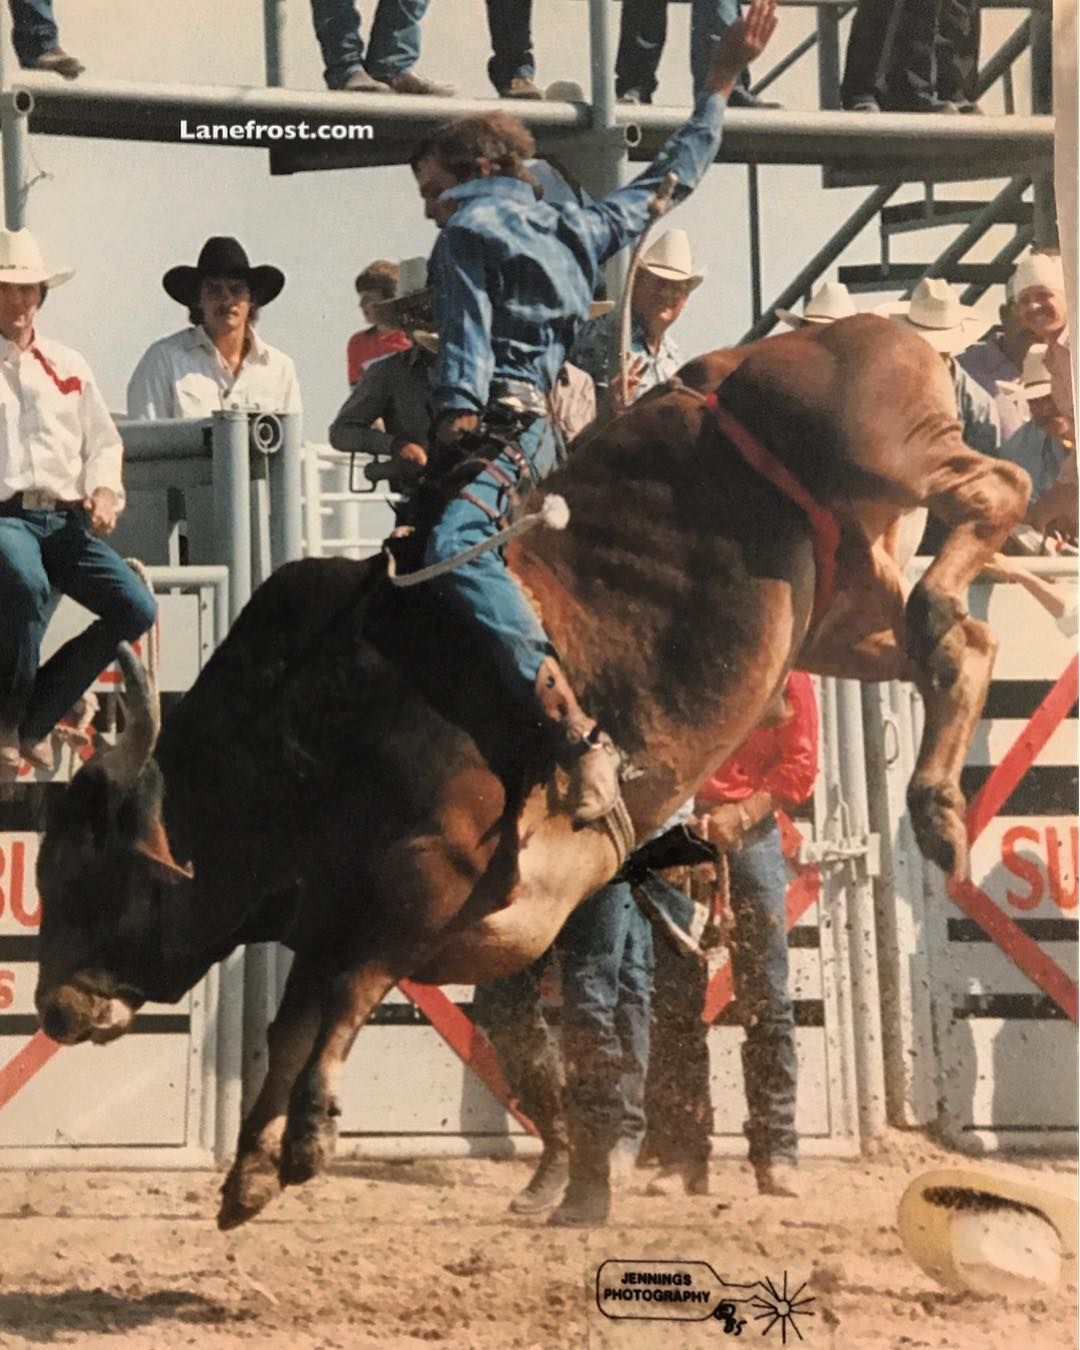 Pin By Dean Thomas On RODEO Pbr. Bull Riding, Cowboy Artists, July In Cheyenne